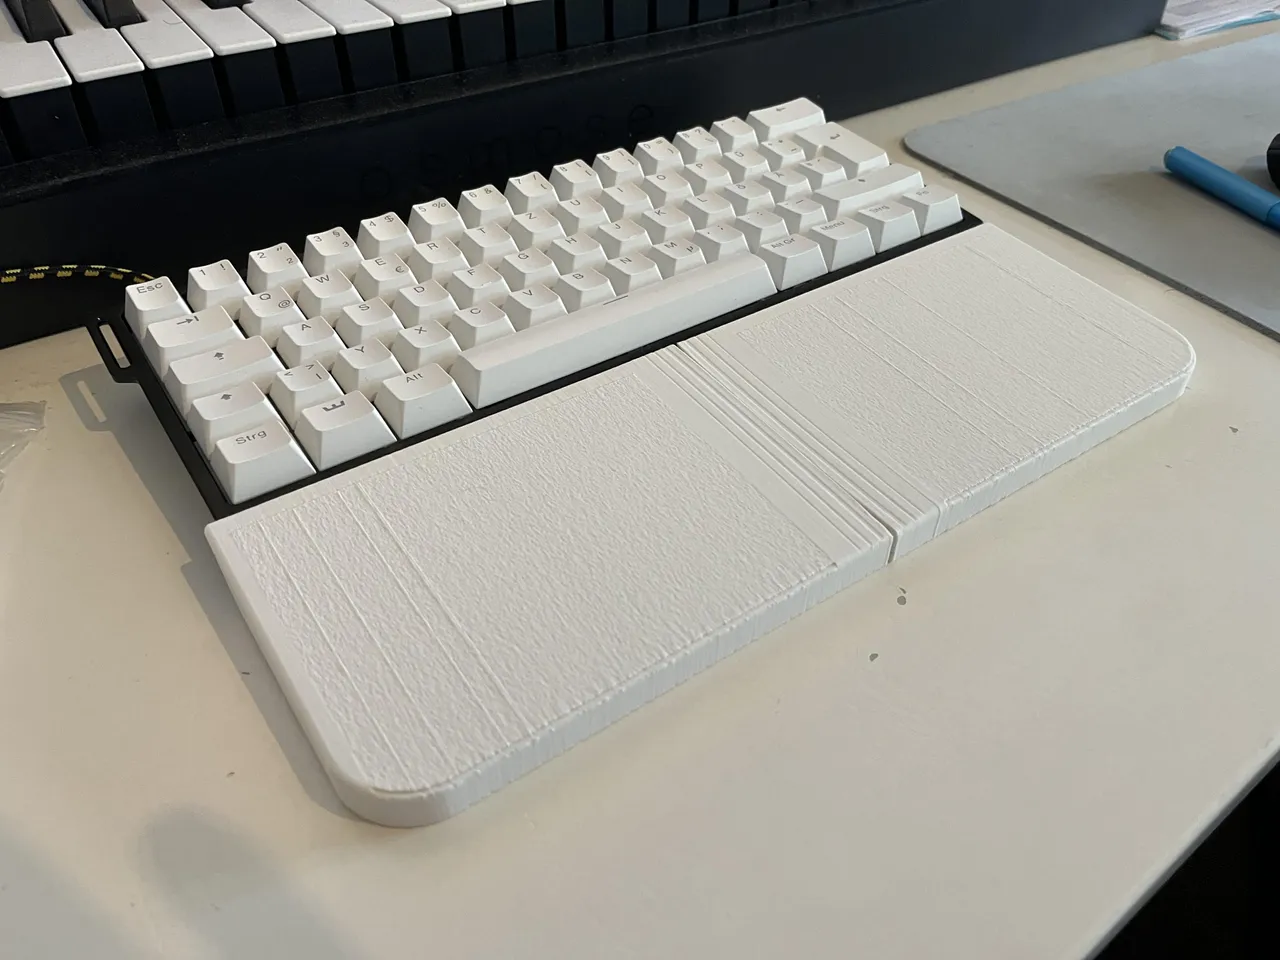 Wooting 60 HE Wrist Rest by Constantin | Download free STL model